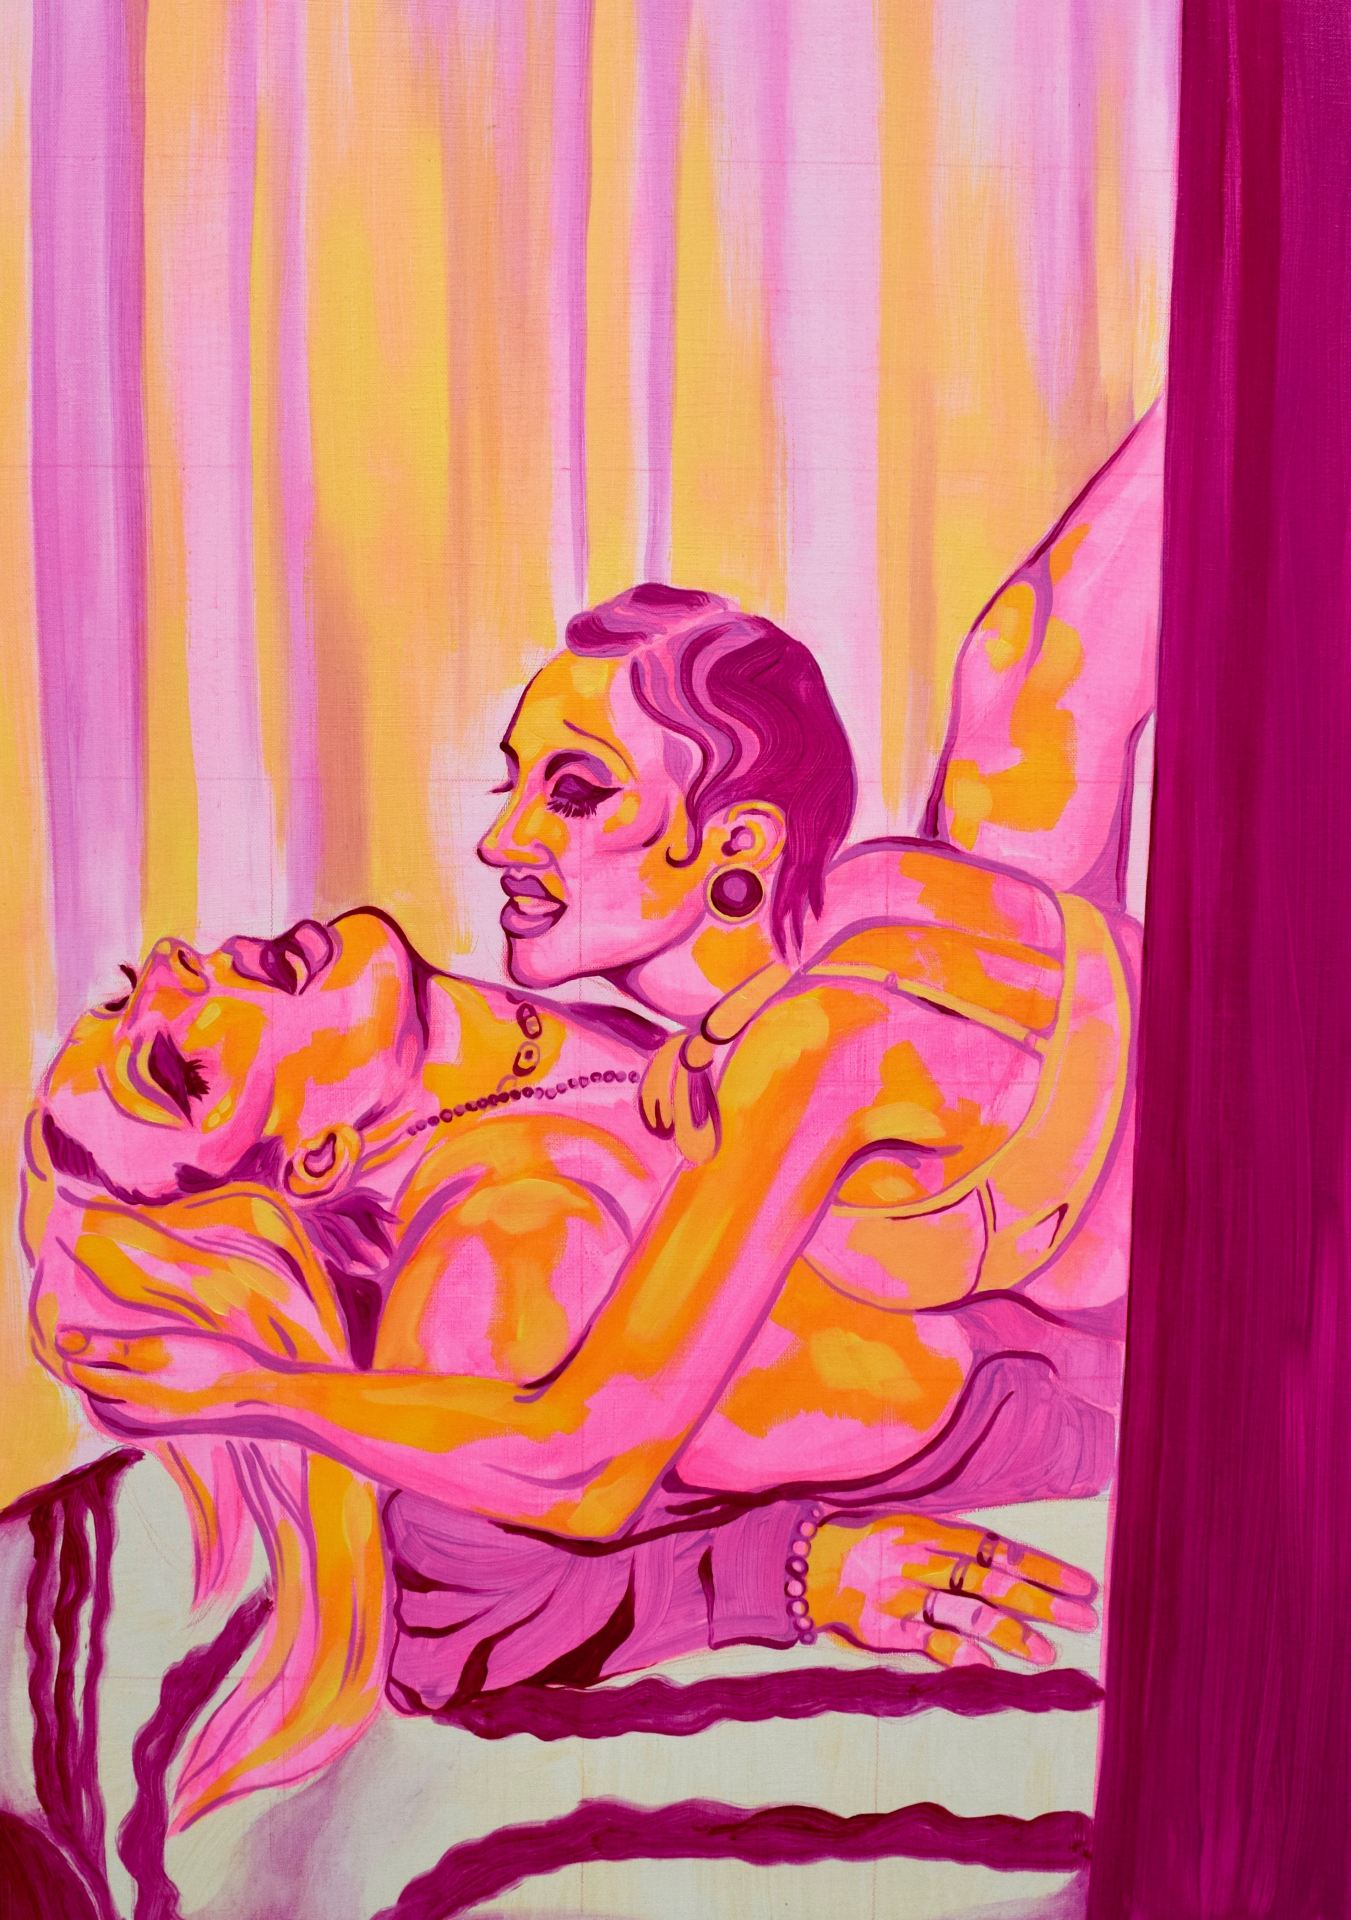 A pink and yellow painting of two women on a bed.